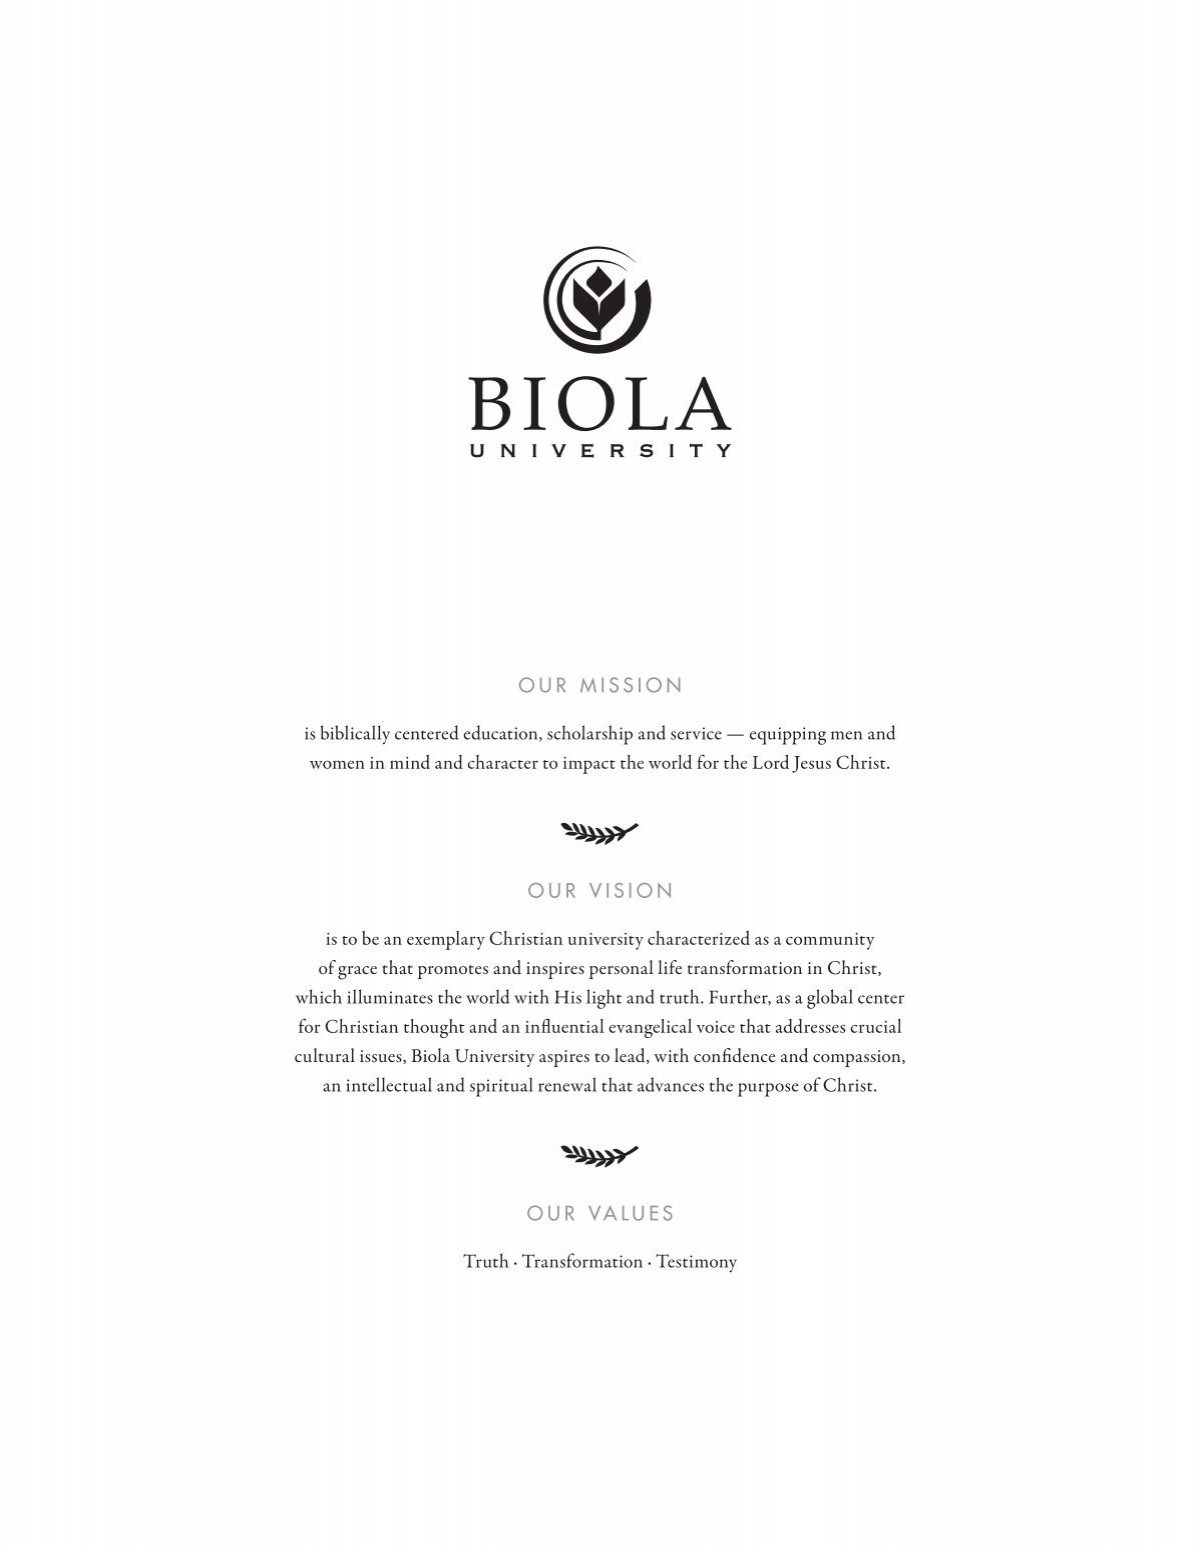 OUR MISSION is biblically centered education  - Biola University